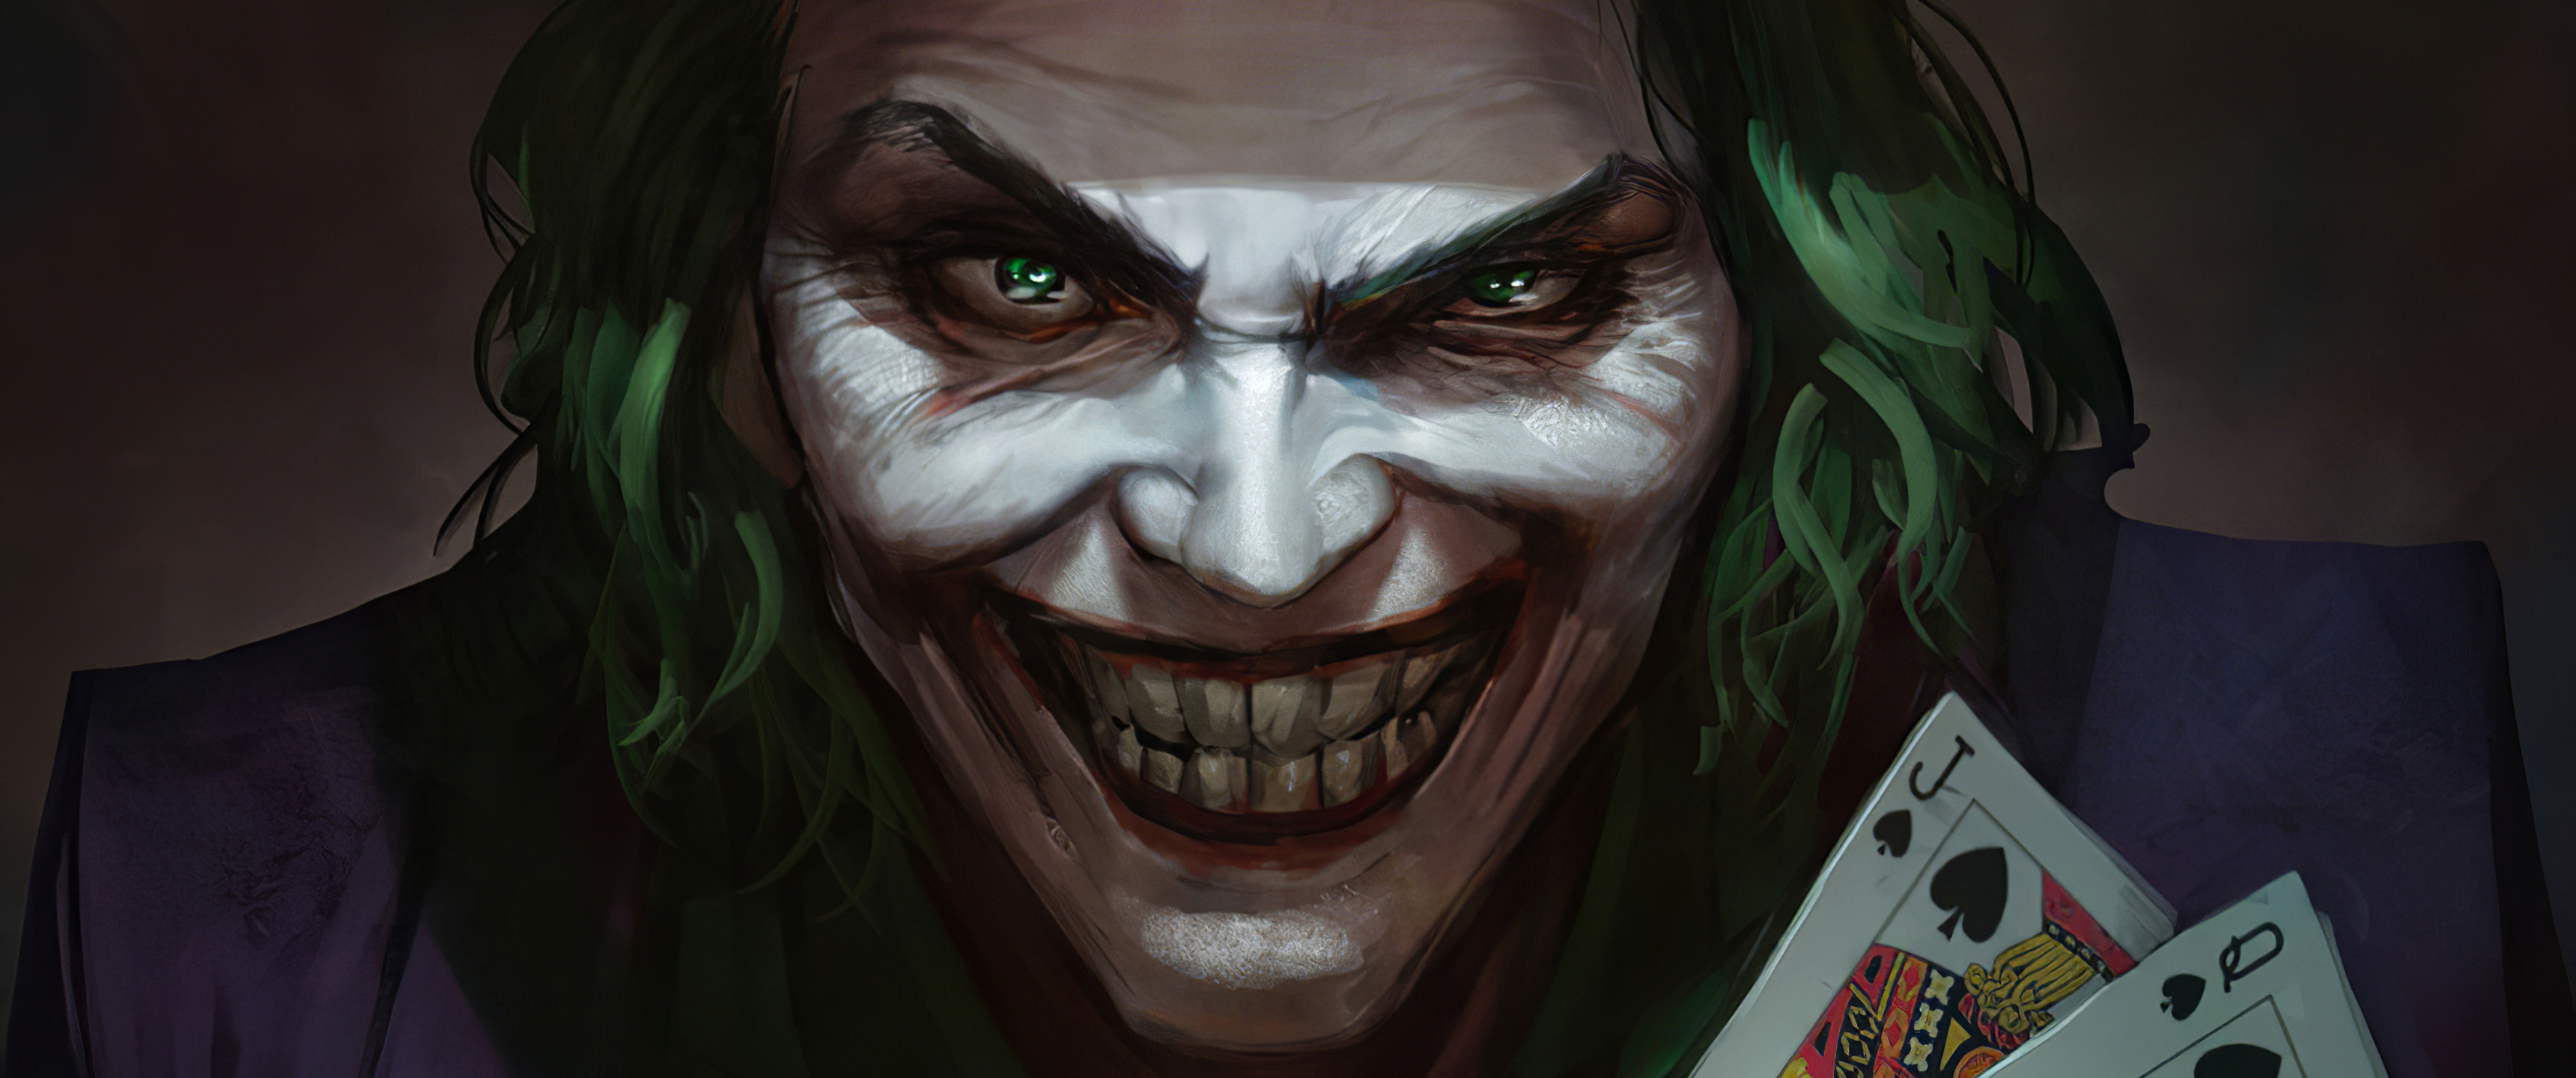 3440x1440 Joker With Cards UltraWide Quad HD 1440P ,HD 4k Wallpapers ...